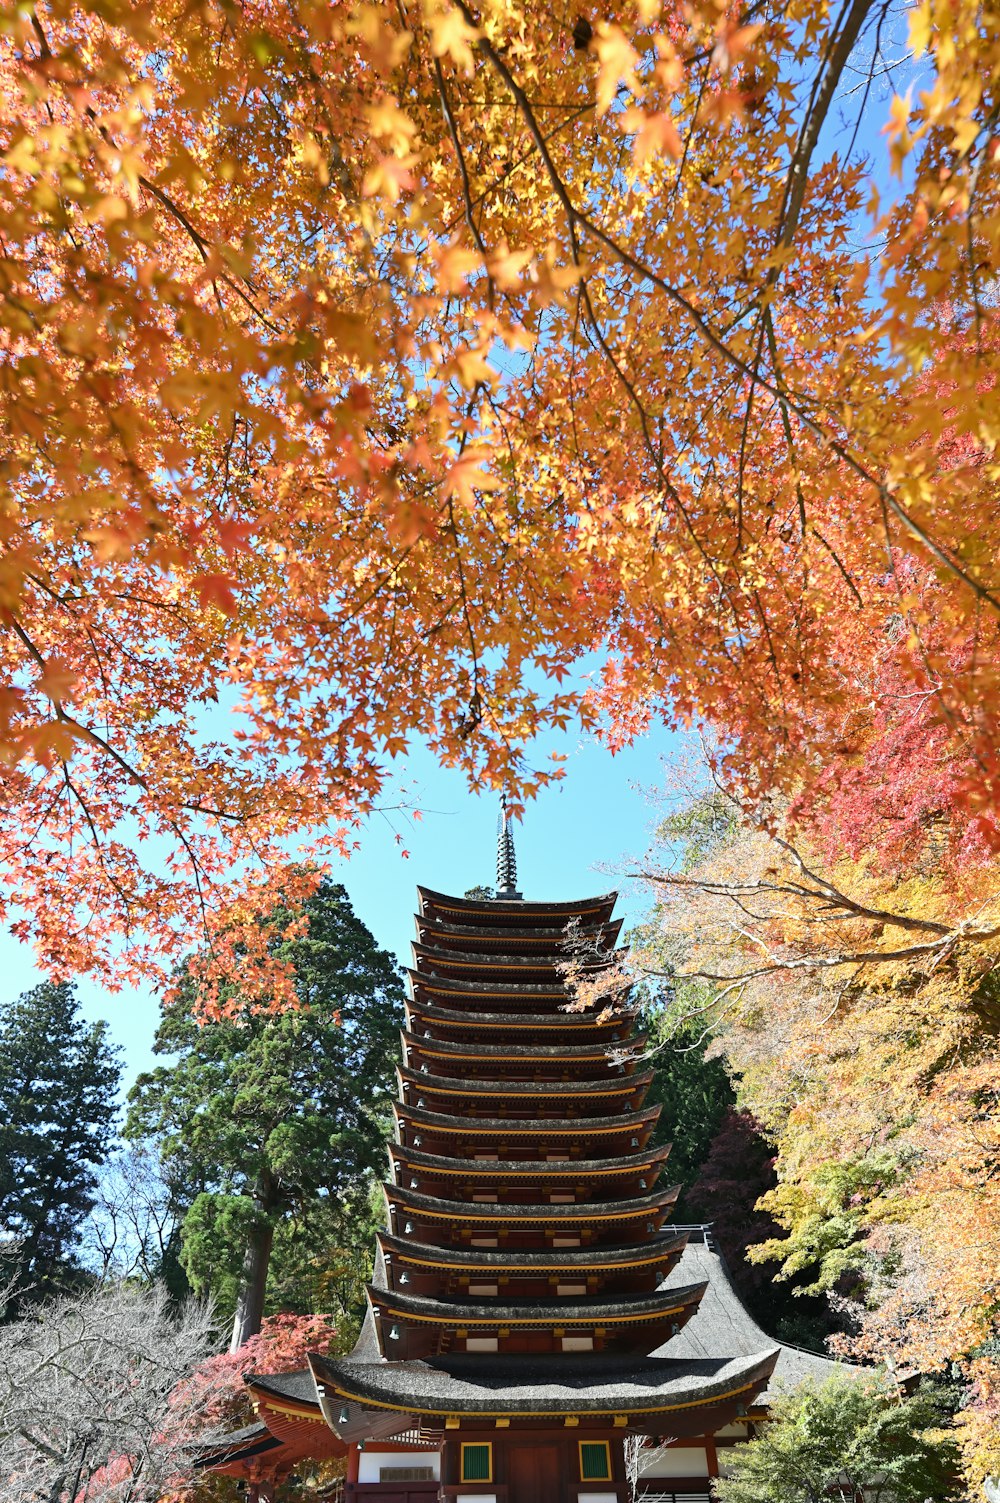 a pagoda in the middle of a park in autumn